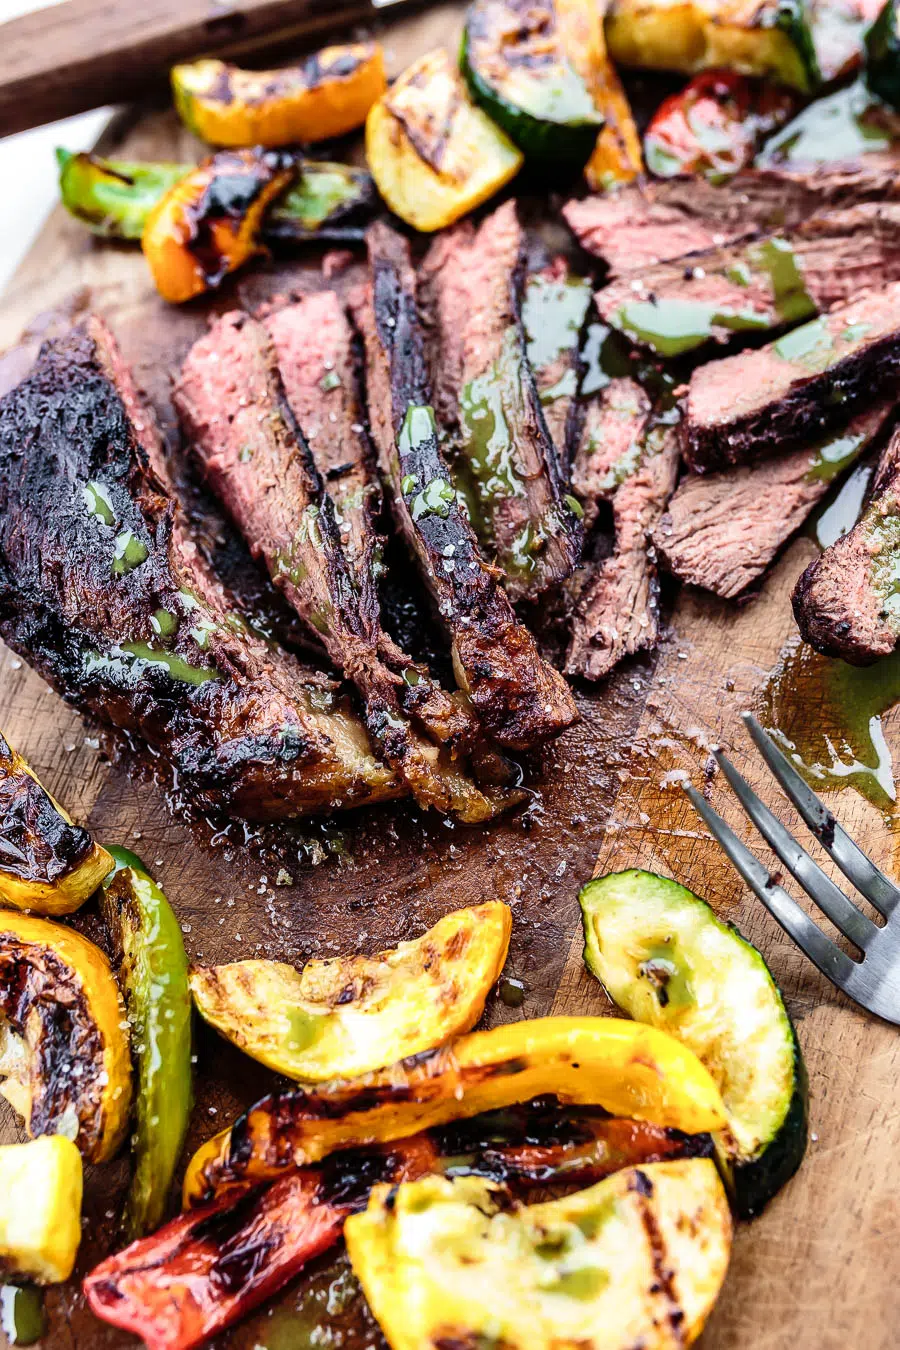 Close up side view of sliced grilled picanha steak with a drizzel of chimichurri on top. Served on a wooden cutting board with grilled vegetables.